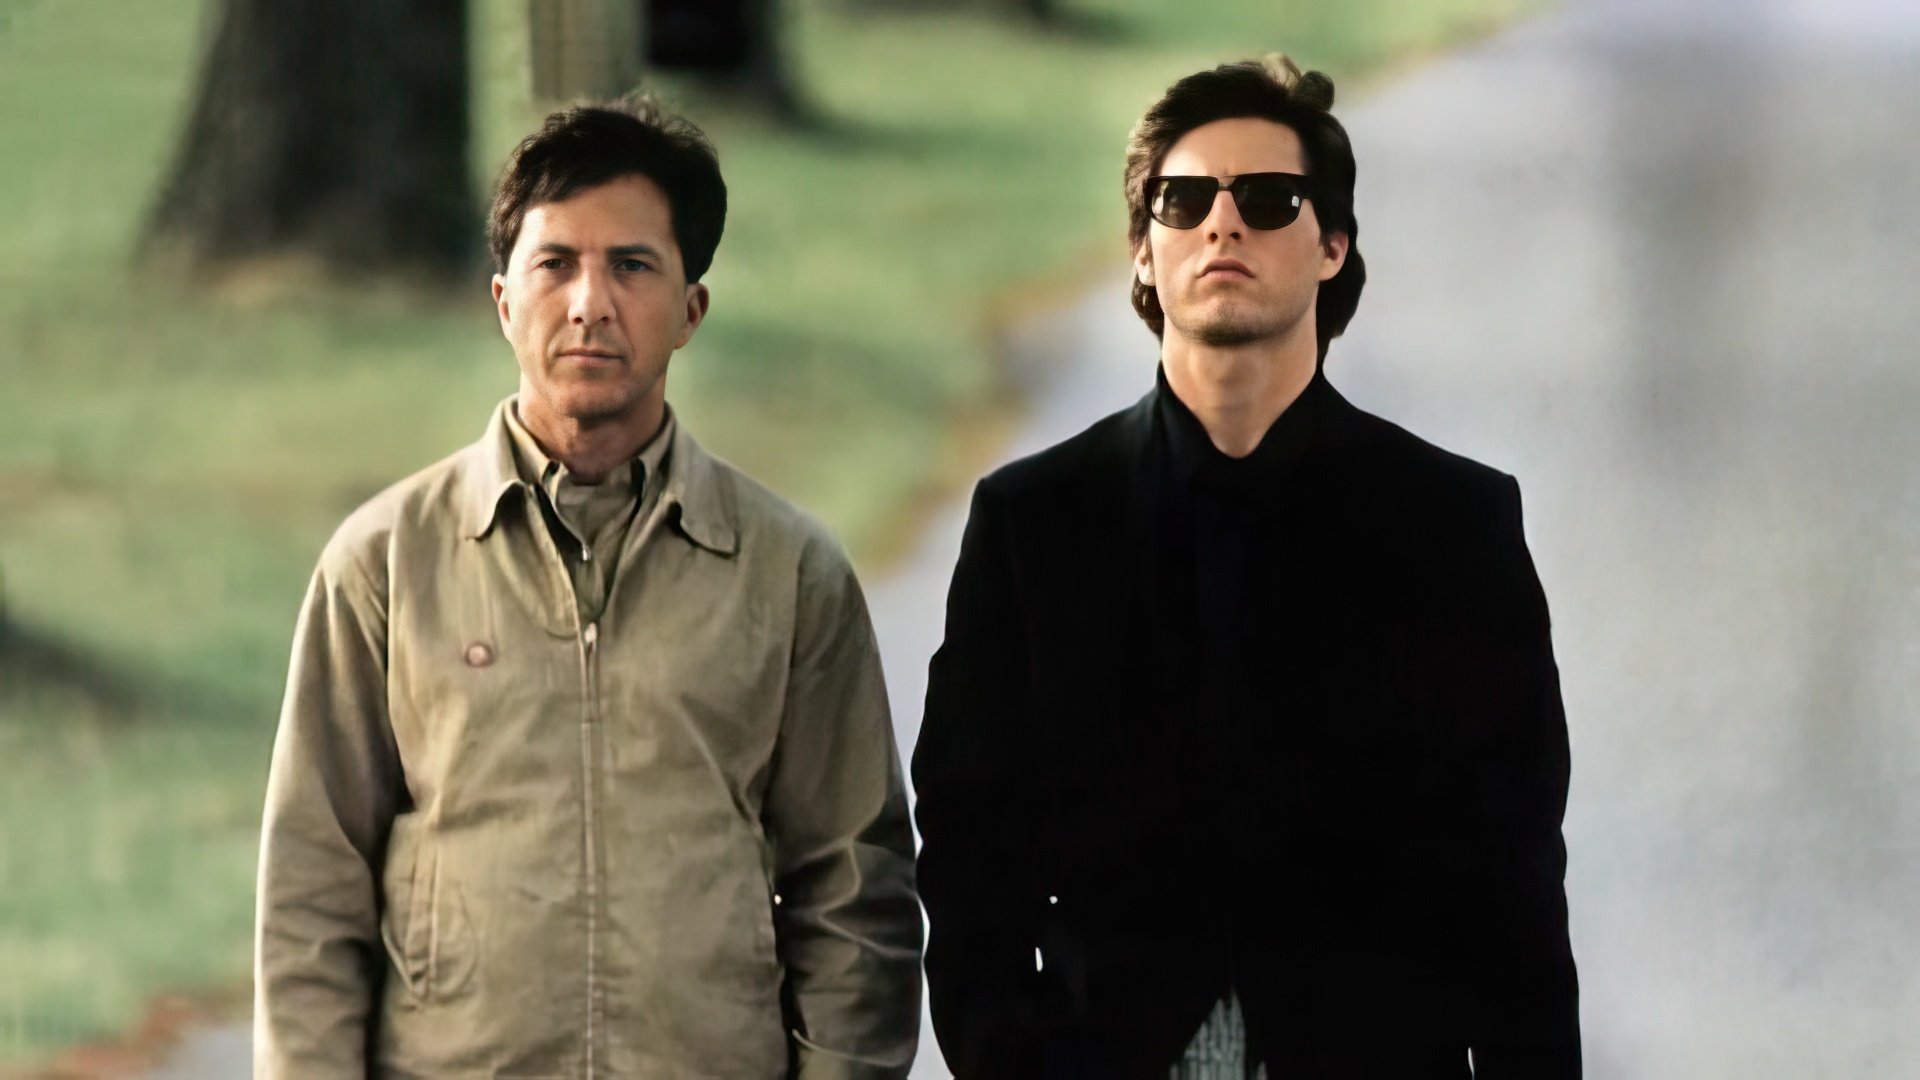 Tom Cruise and Dustin Hoffman made one of the best acting duos